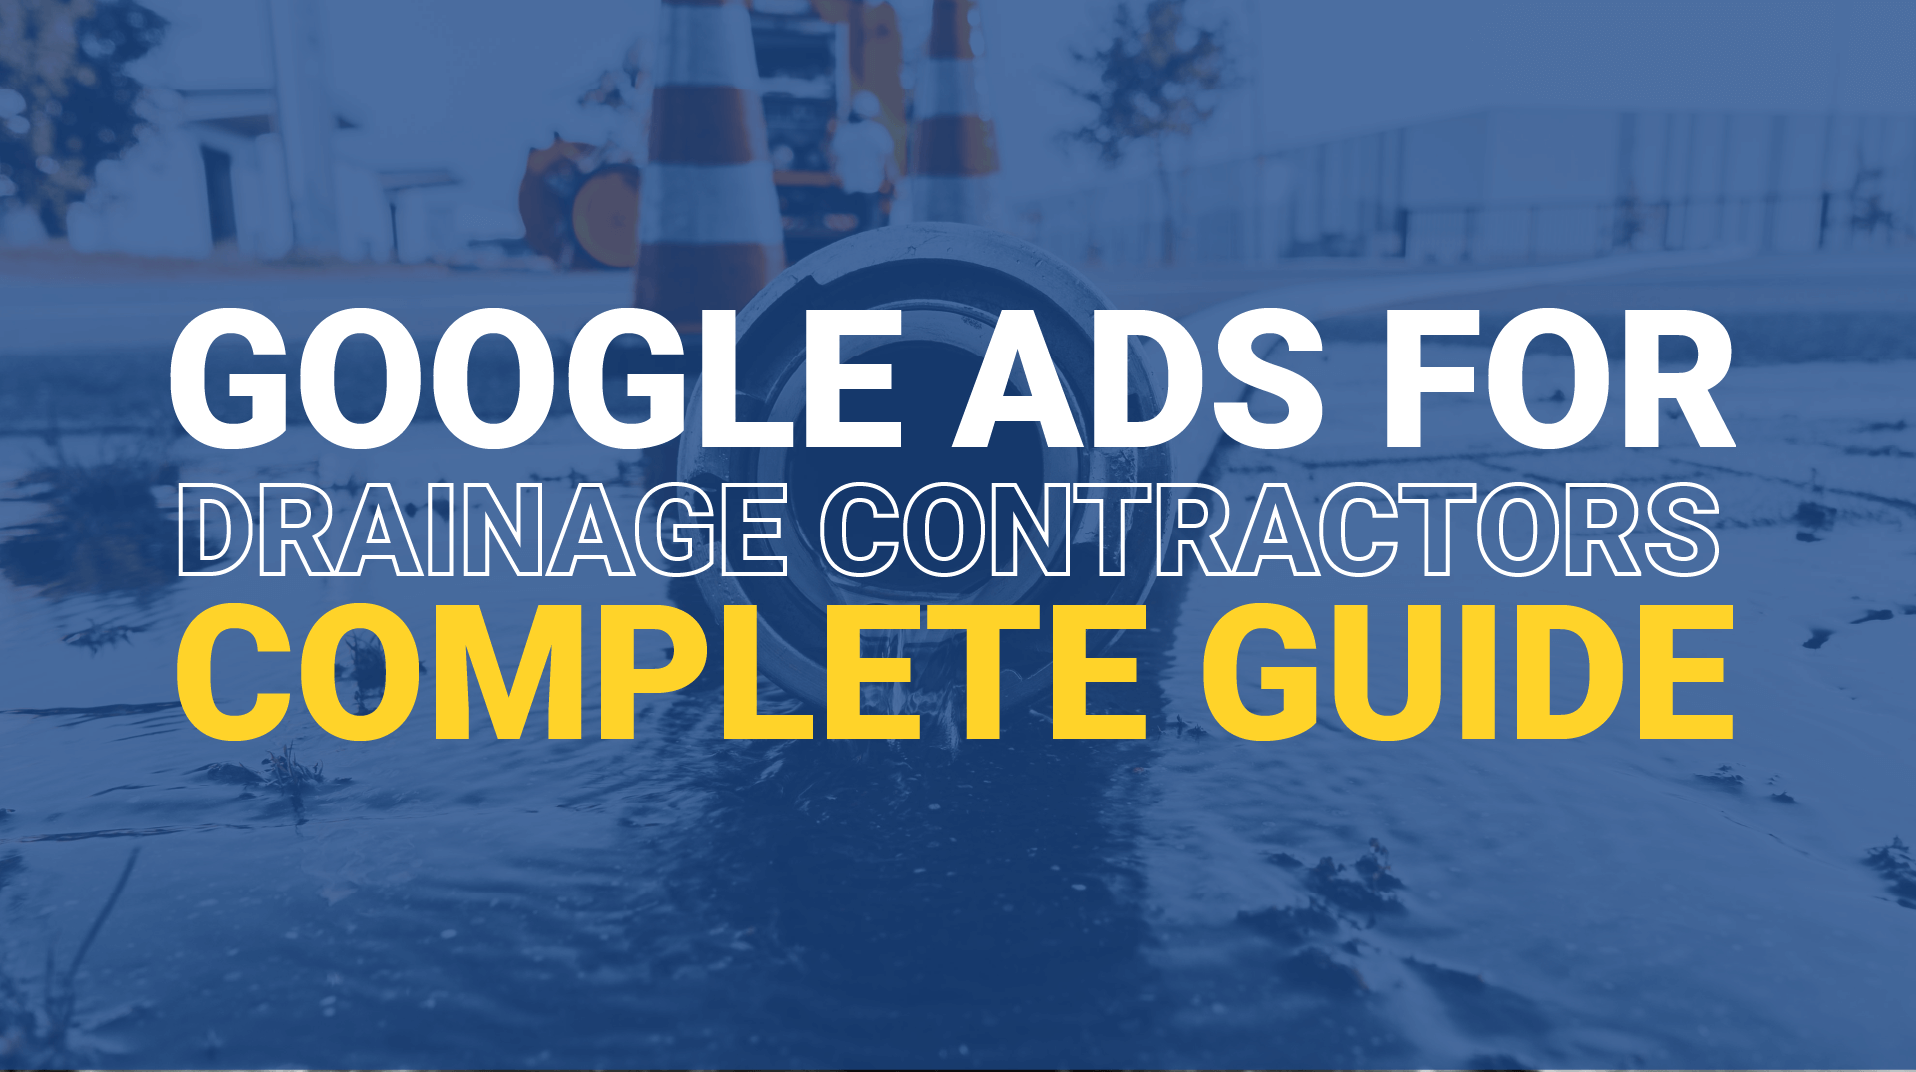 Revolutionising Google Ads for Drainage Contractors